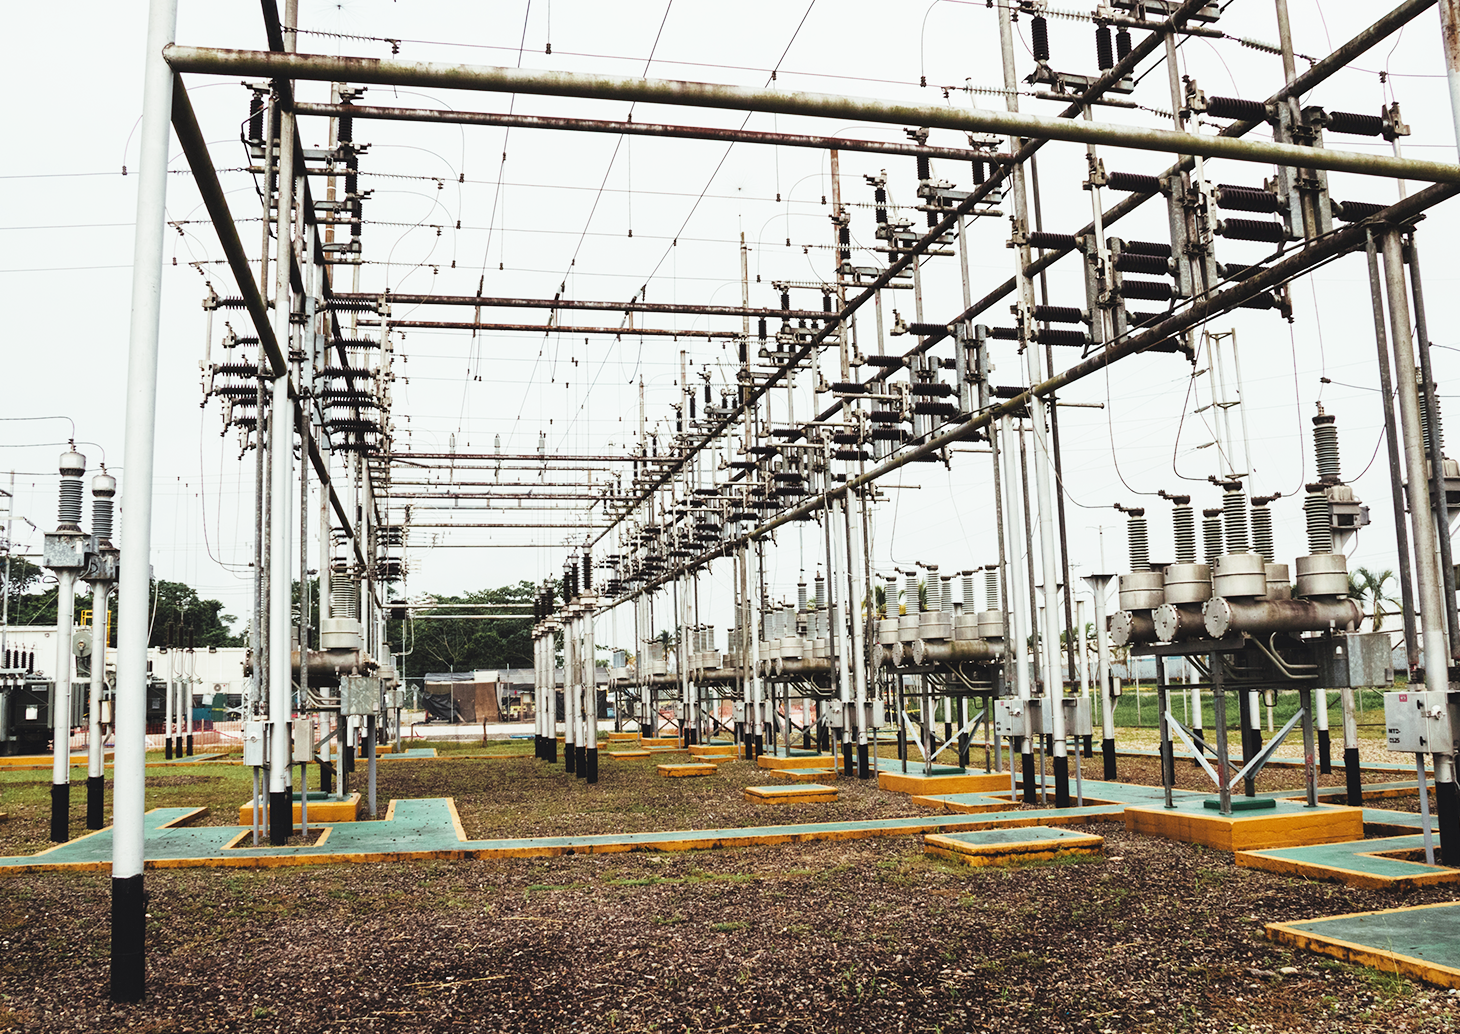 A sprawling electrical substation with numerous wires and poles, serving as a vital hub for power distribution.